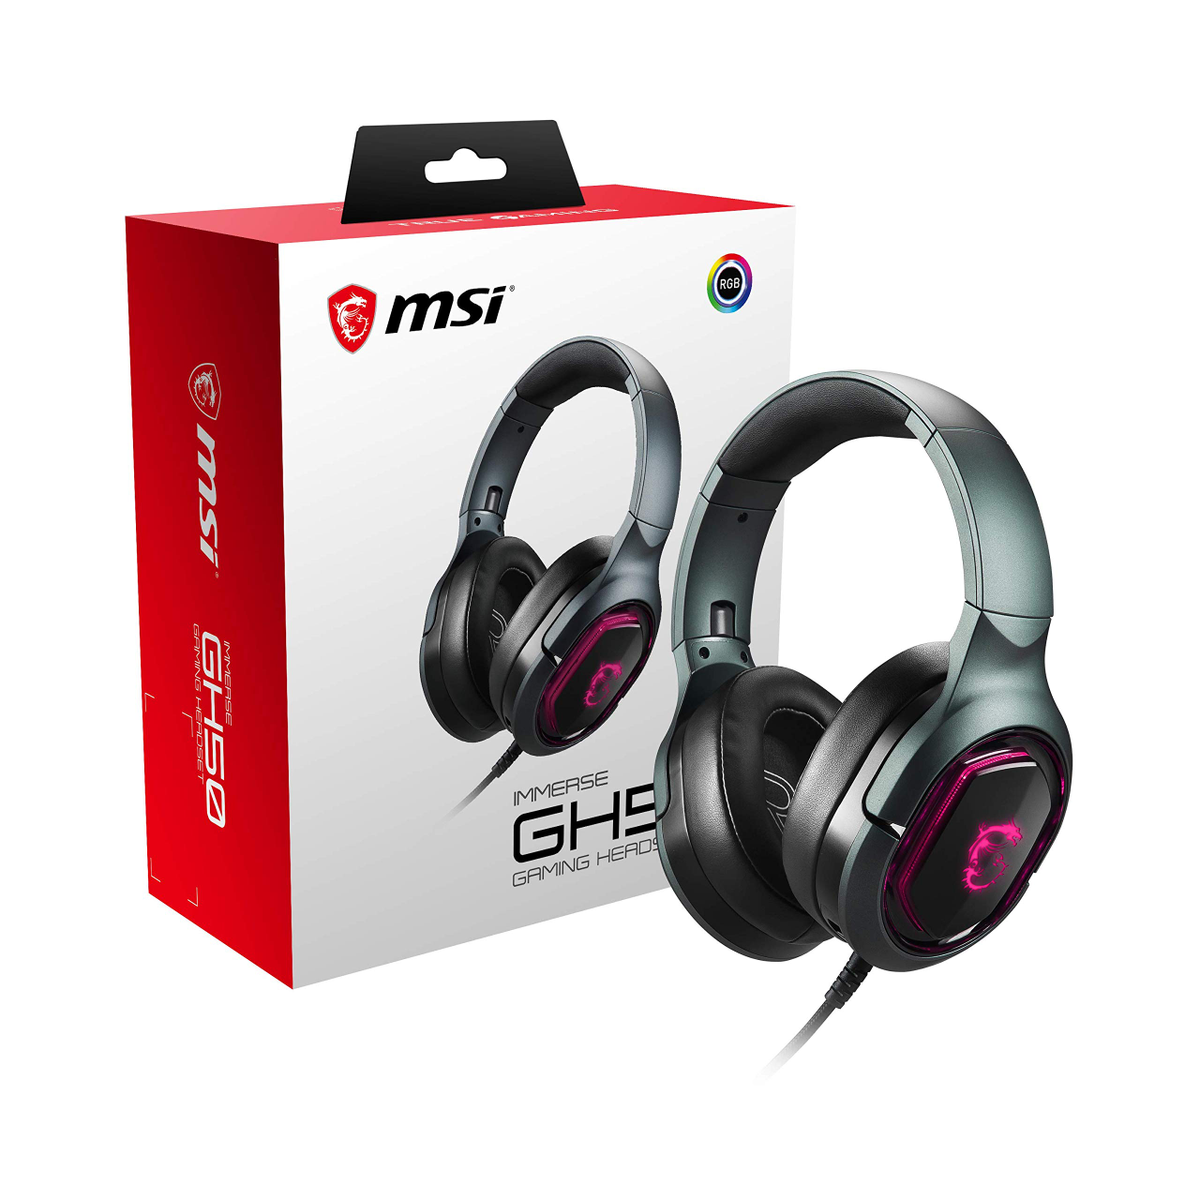 Schwarz Gaming GAMING IMMERSE S37-0400020-SV1 GH50 HEADSET, Over-ear MSI Headset